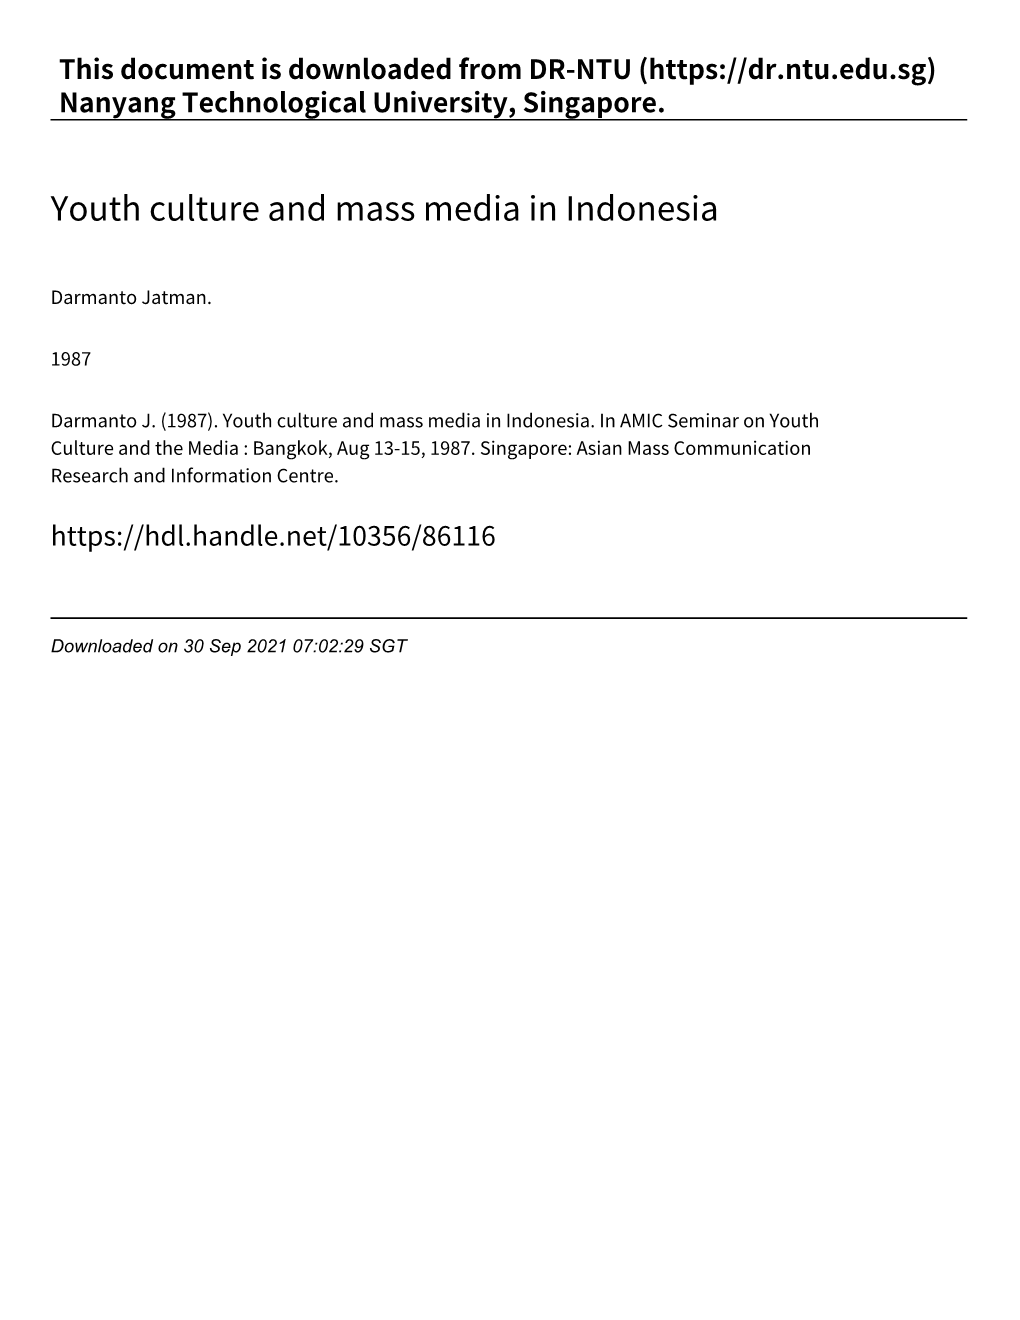 Youth Culture and Mass Media in Indonesia